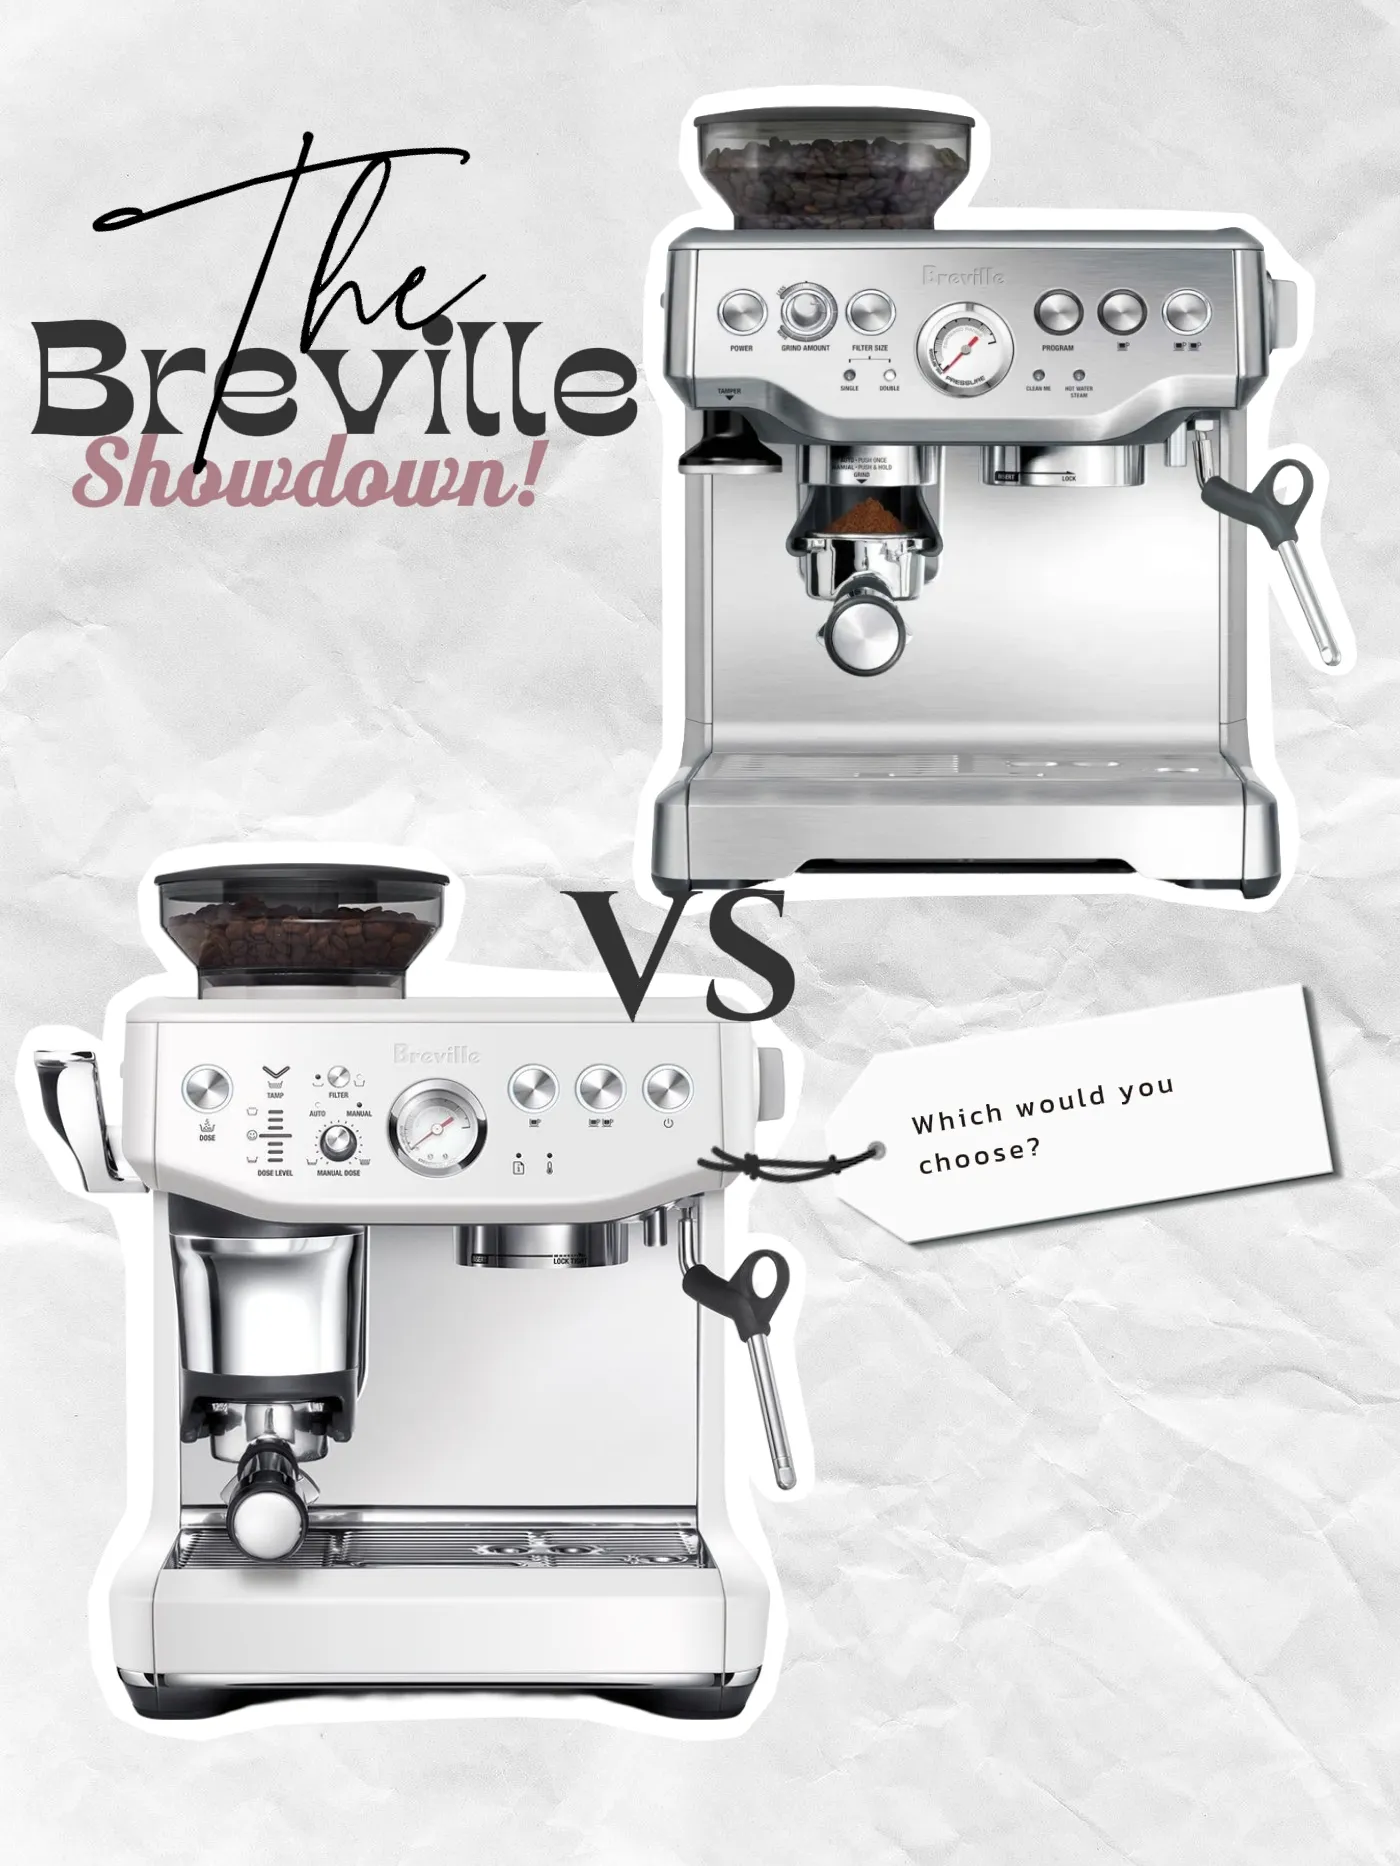 The Breville Barista Express is not exclusive to making espresso drink, #coffee